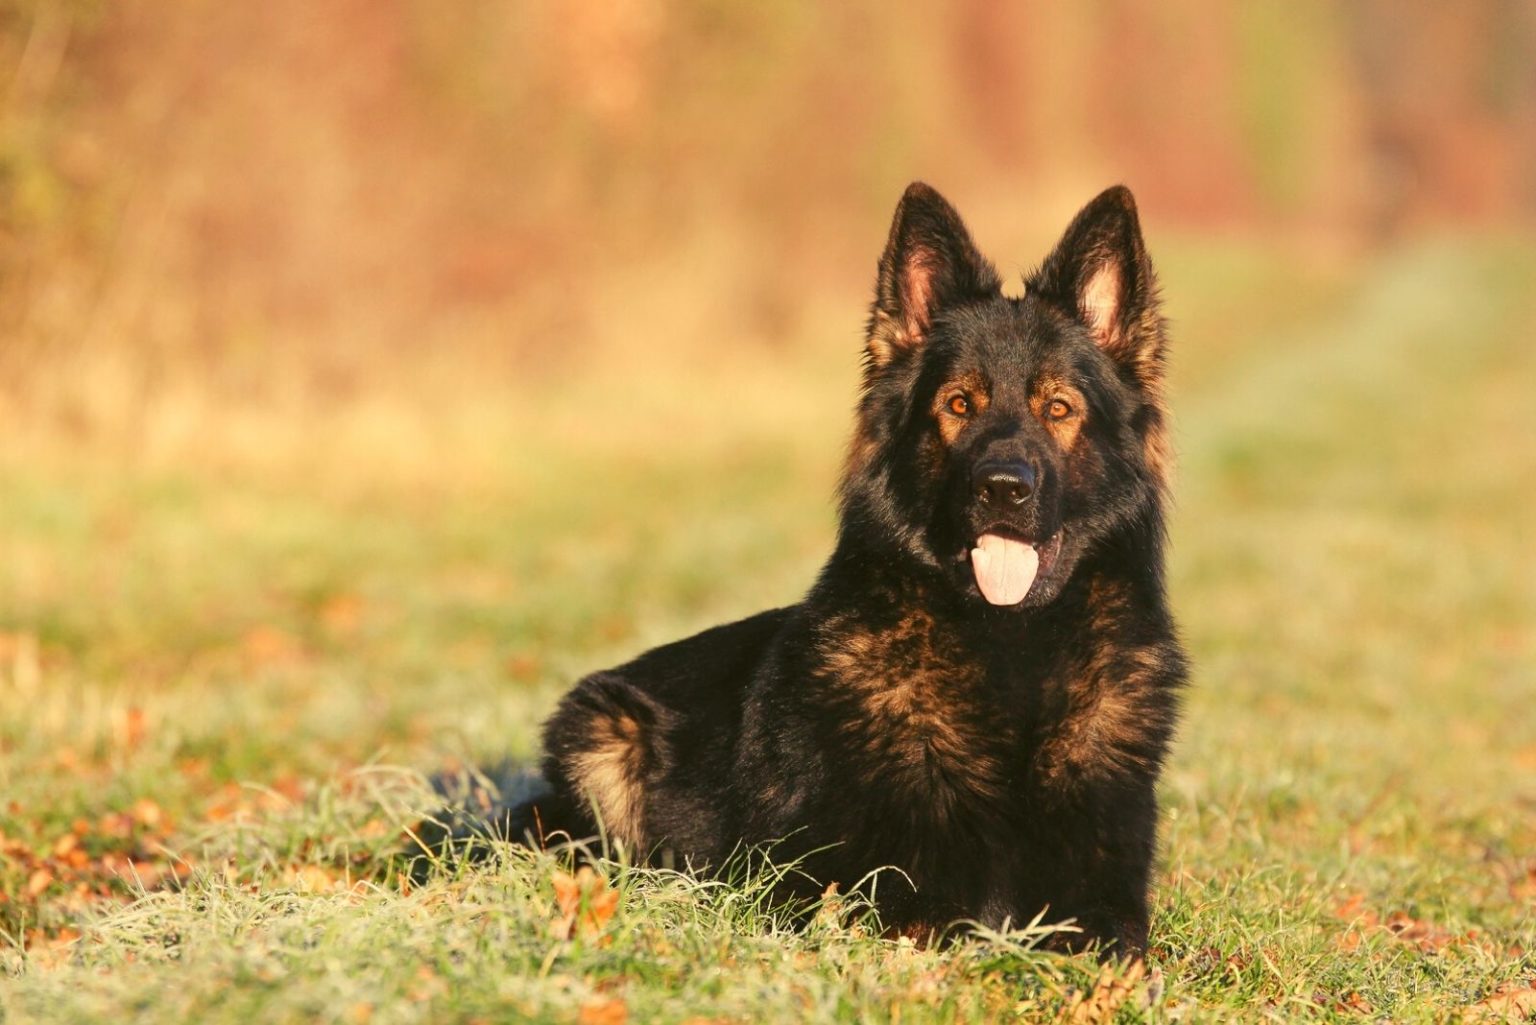 Sable German Shepherd: What You Didn't Know